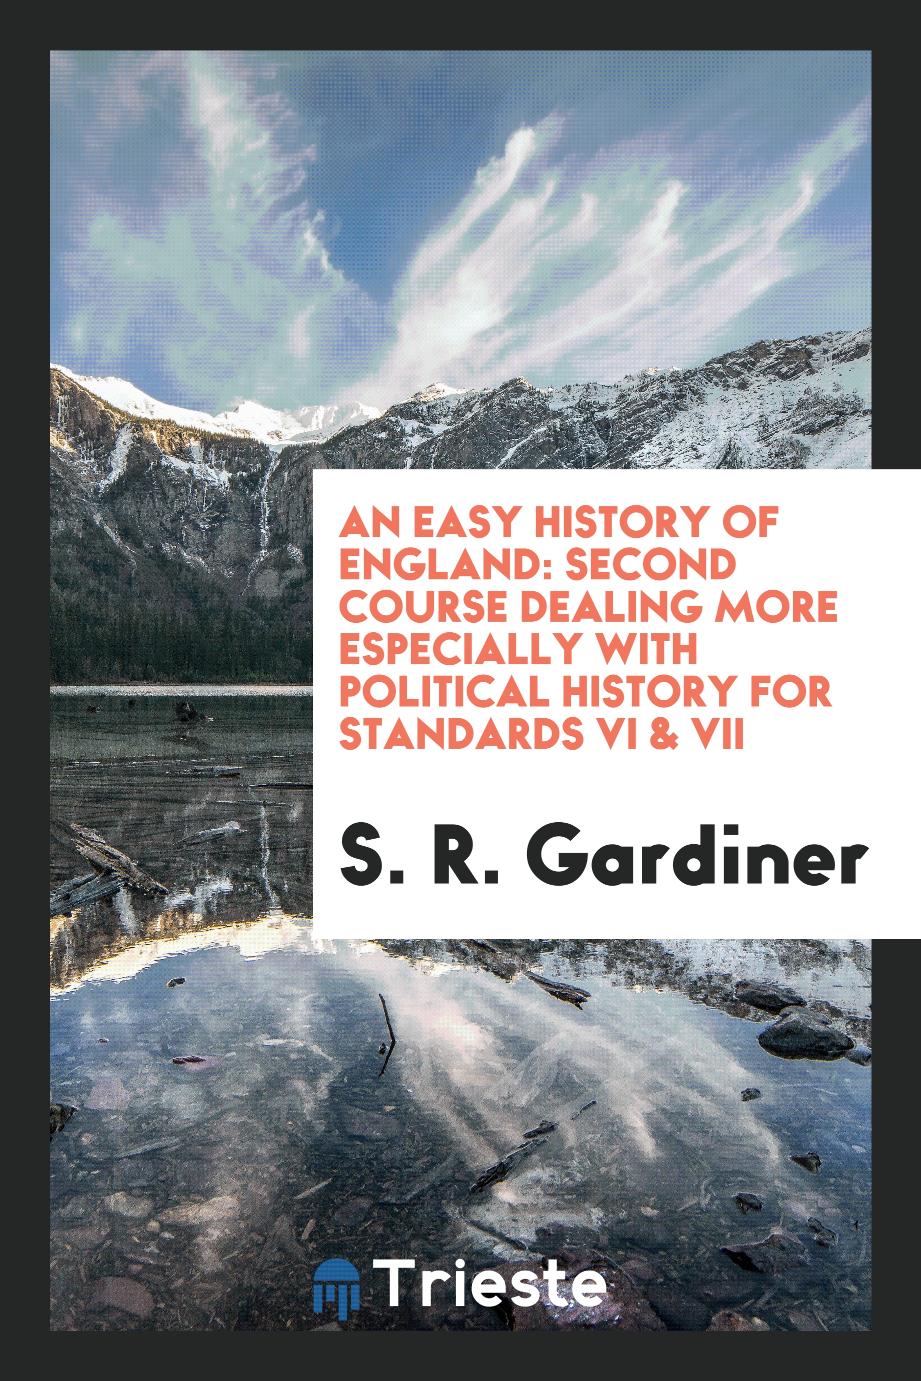 An Easy History of England: Second Course Dealing More Especially with Political History for Standards VI & VII